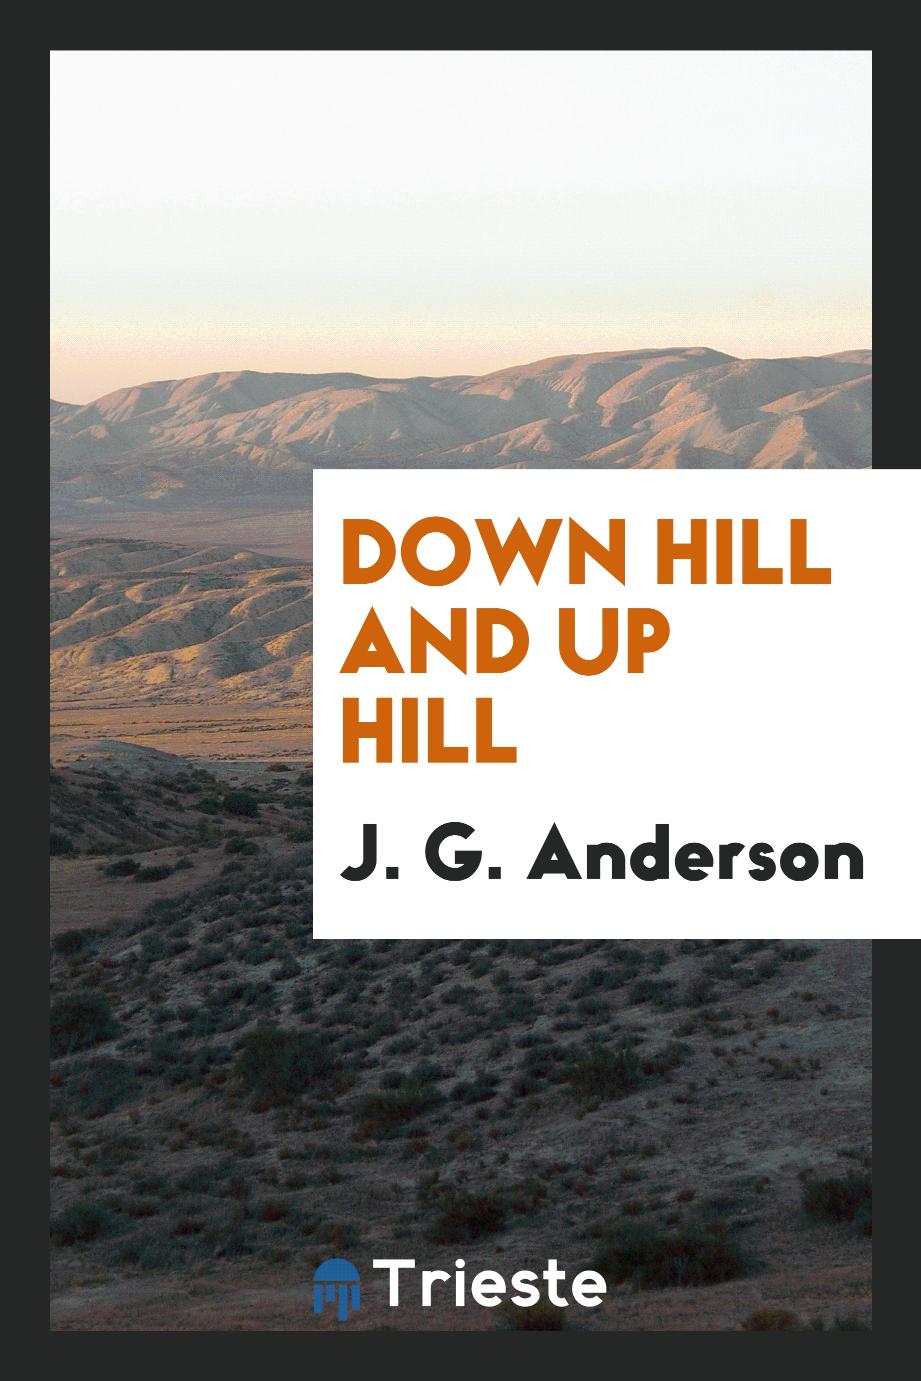 Down Hill and up Hill